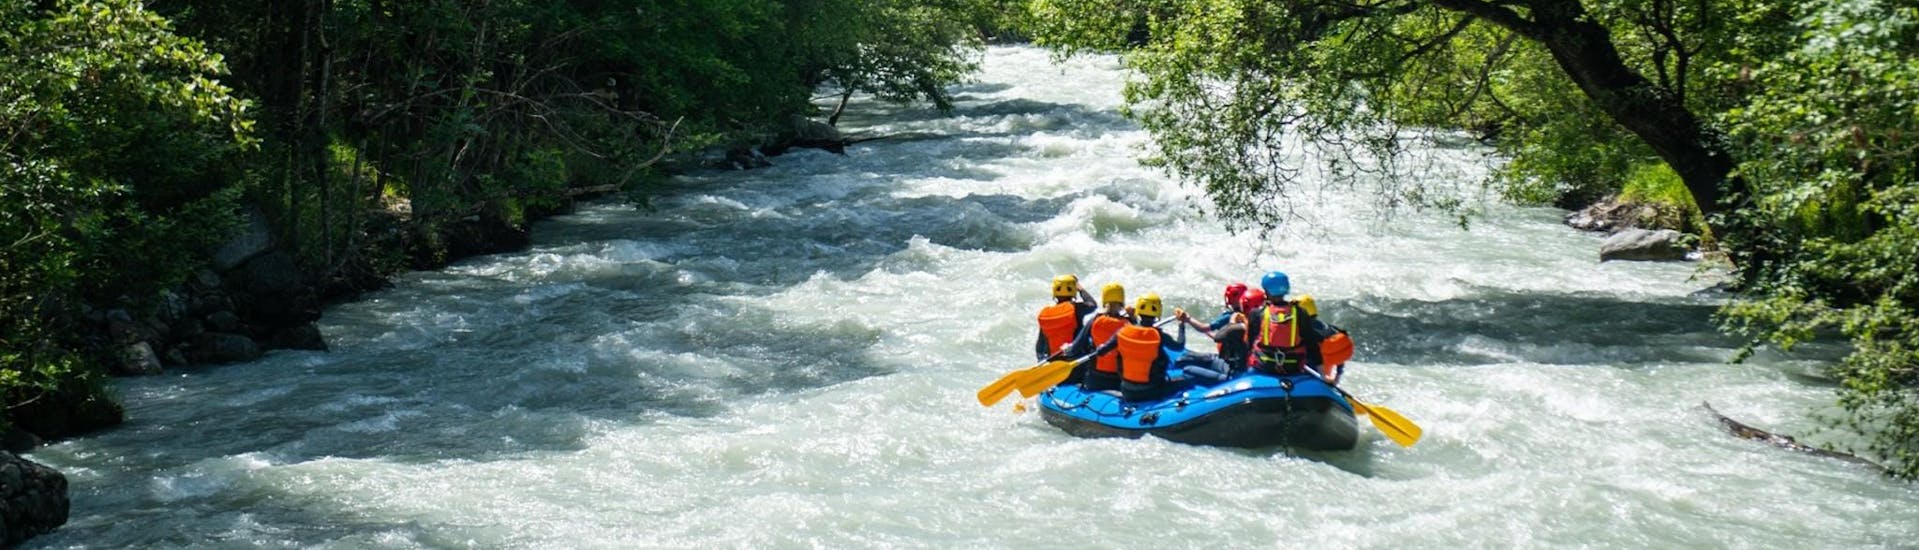 A group of people is paddling during the Rafting activity for a full day on the Guisane with Eaurigine.